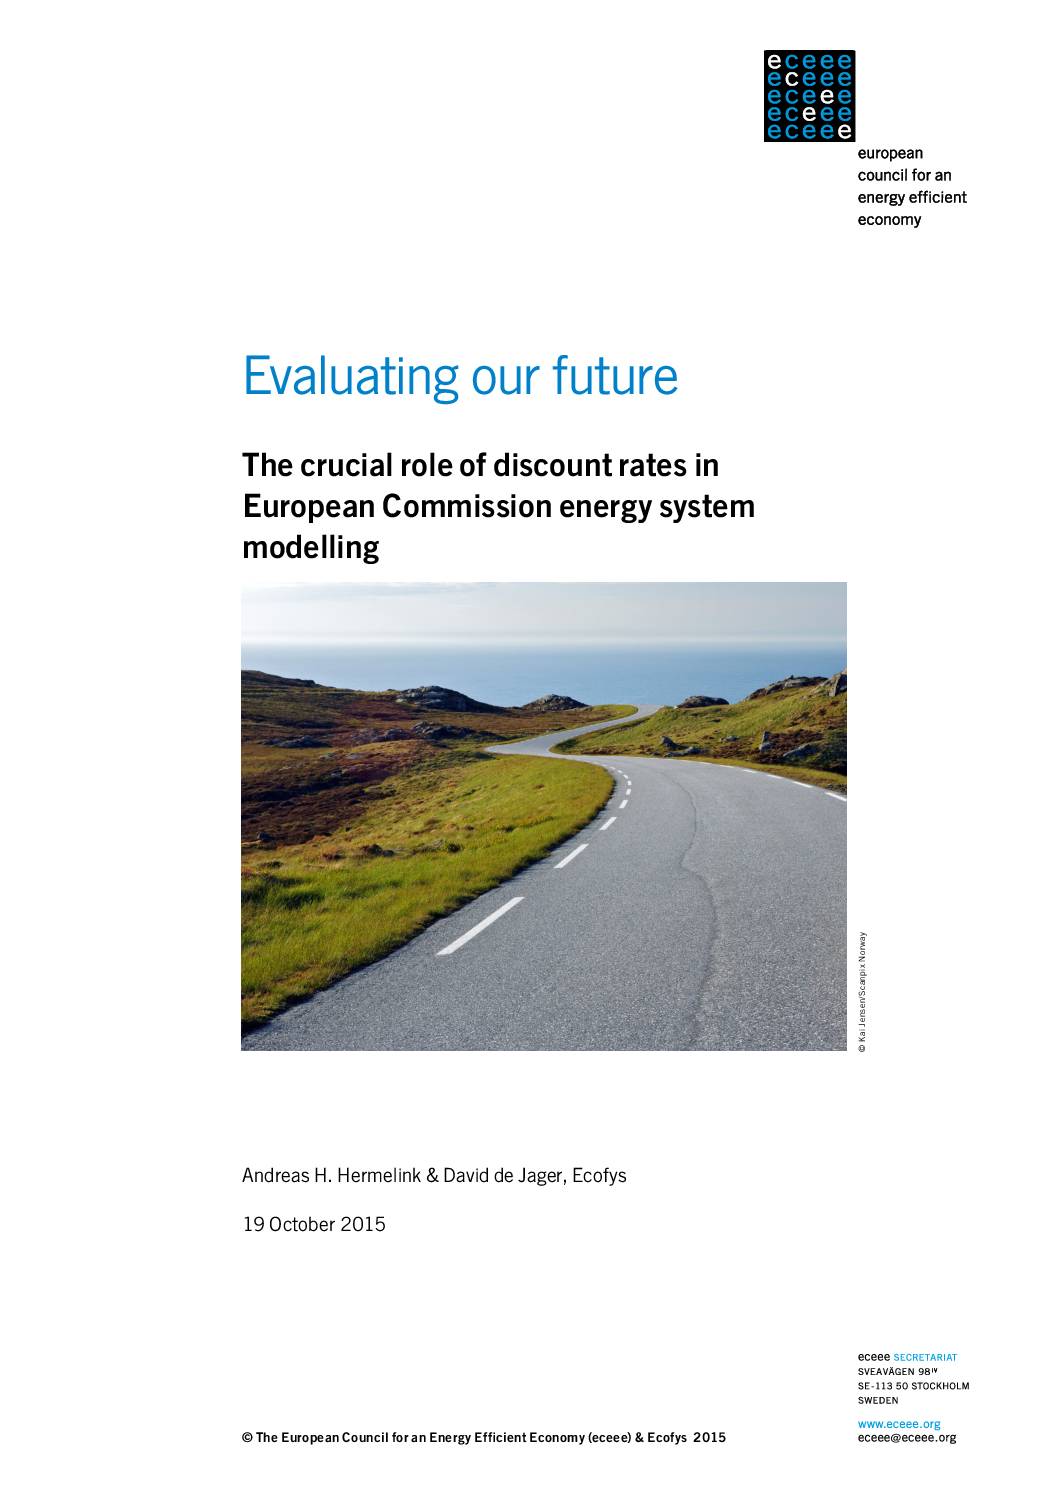 Evaluating Our Future: The crucial role of discount rates in European Commission energy system modelling